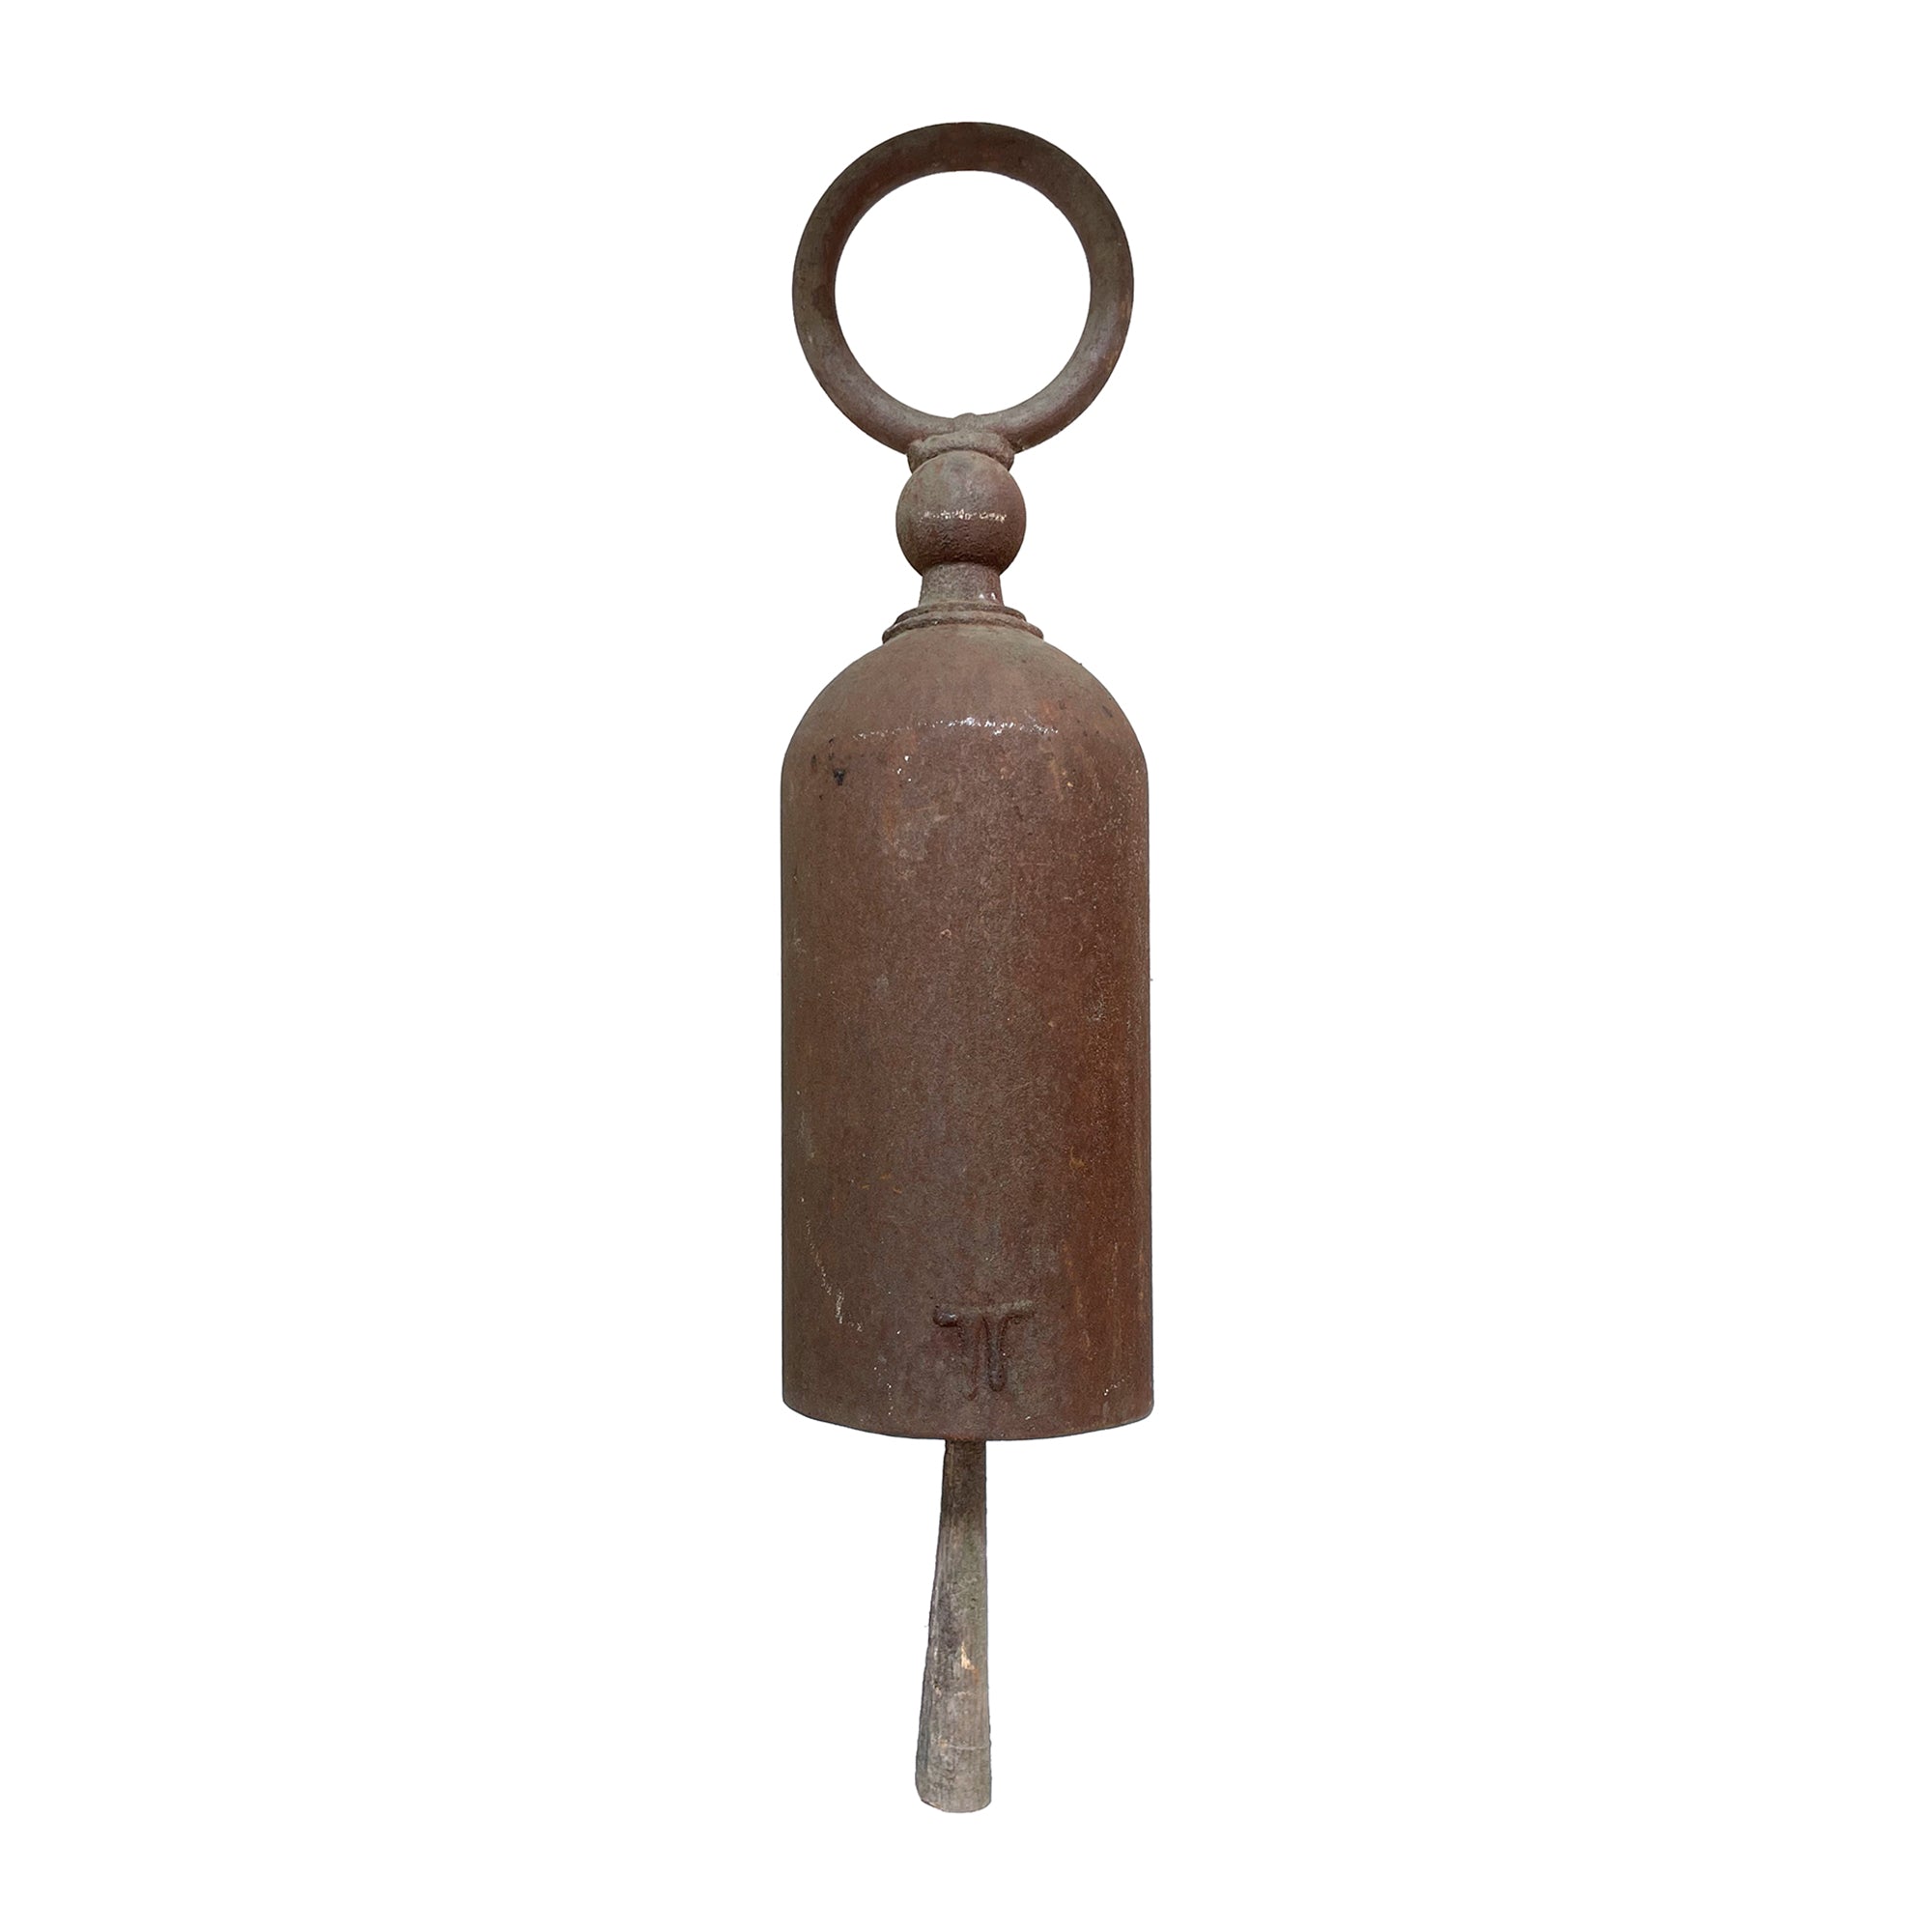 Modernist Cylindrical Iron Hanging Garden Bell by Tom Torrens